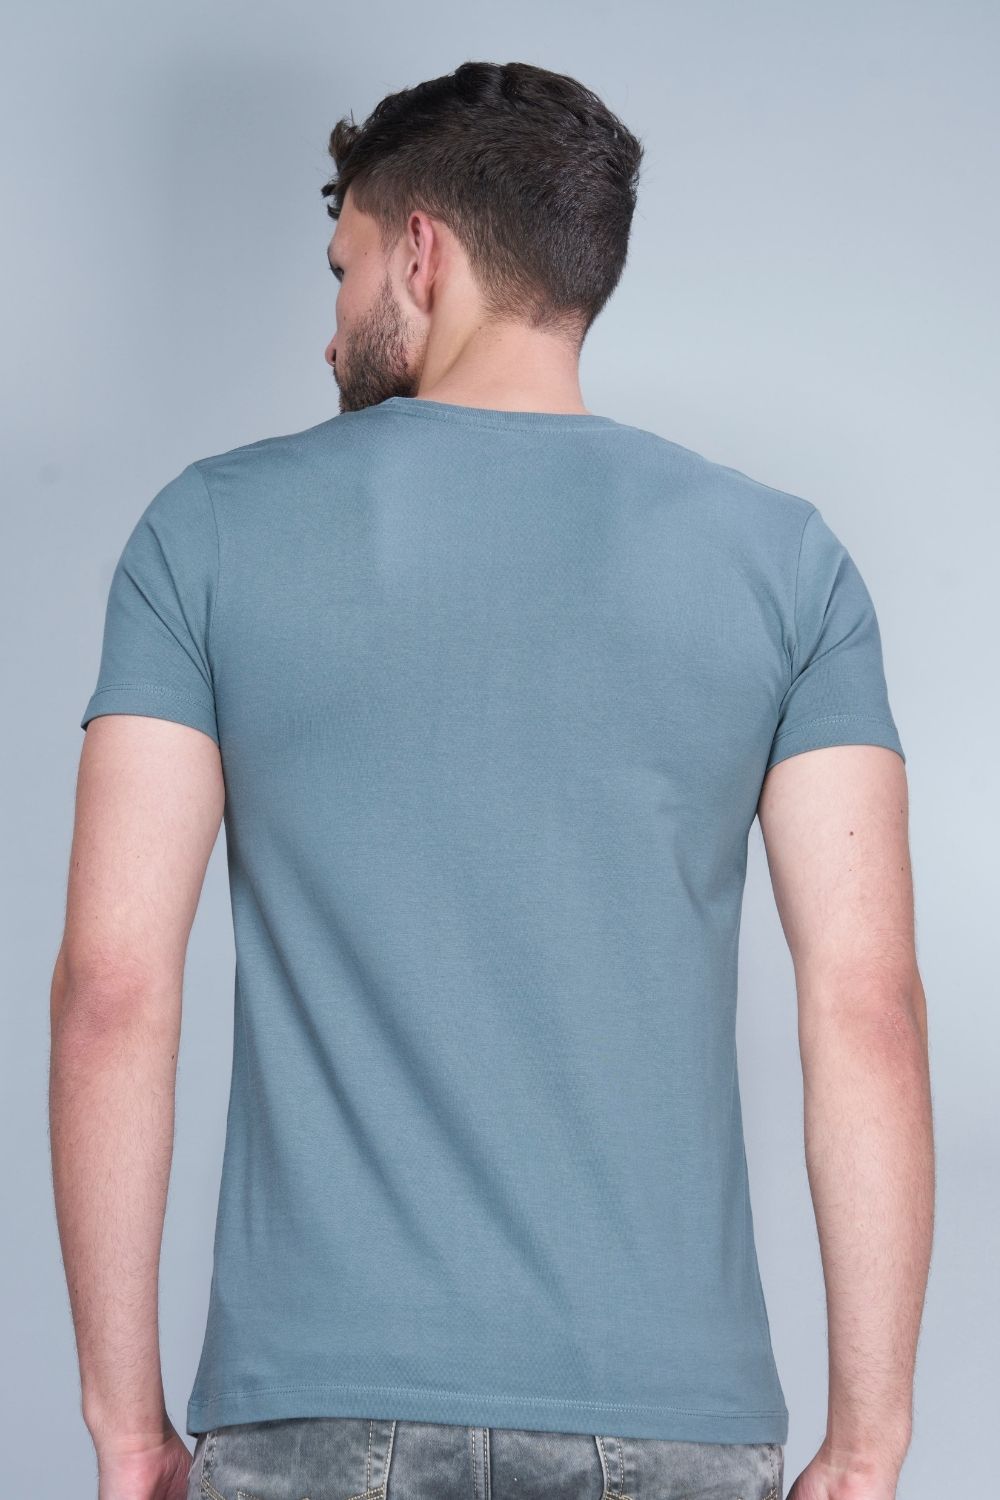 grey colored, cotton Graphic T shirt for men with half sleeves and round neck, back view.